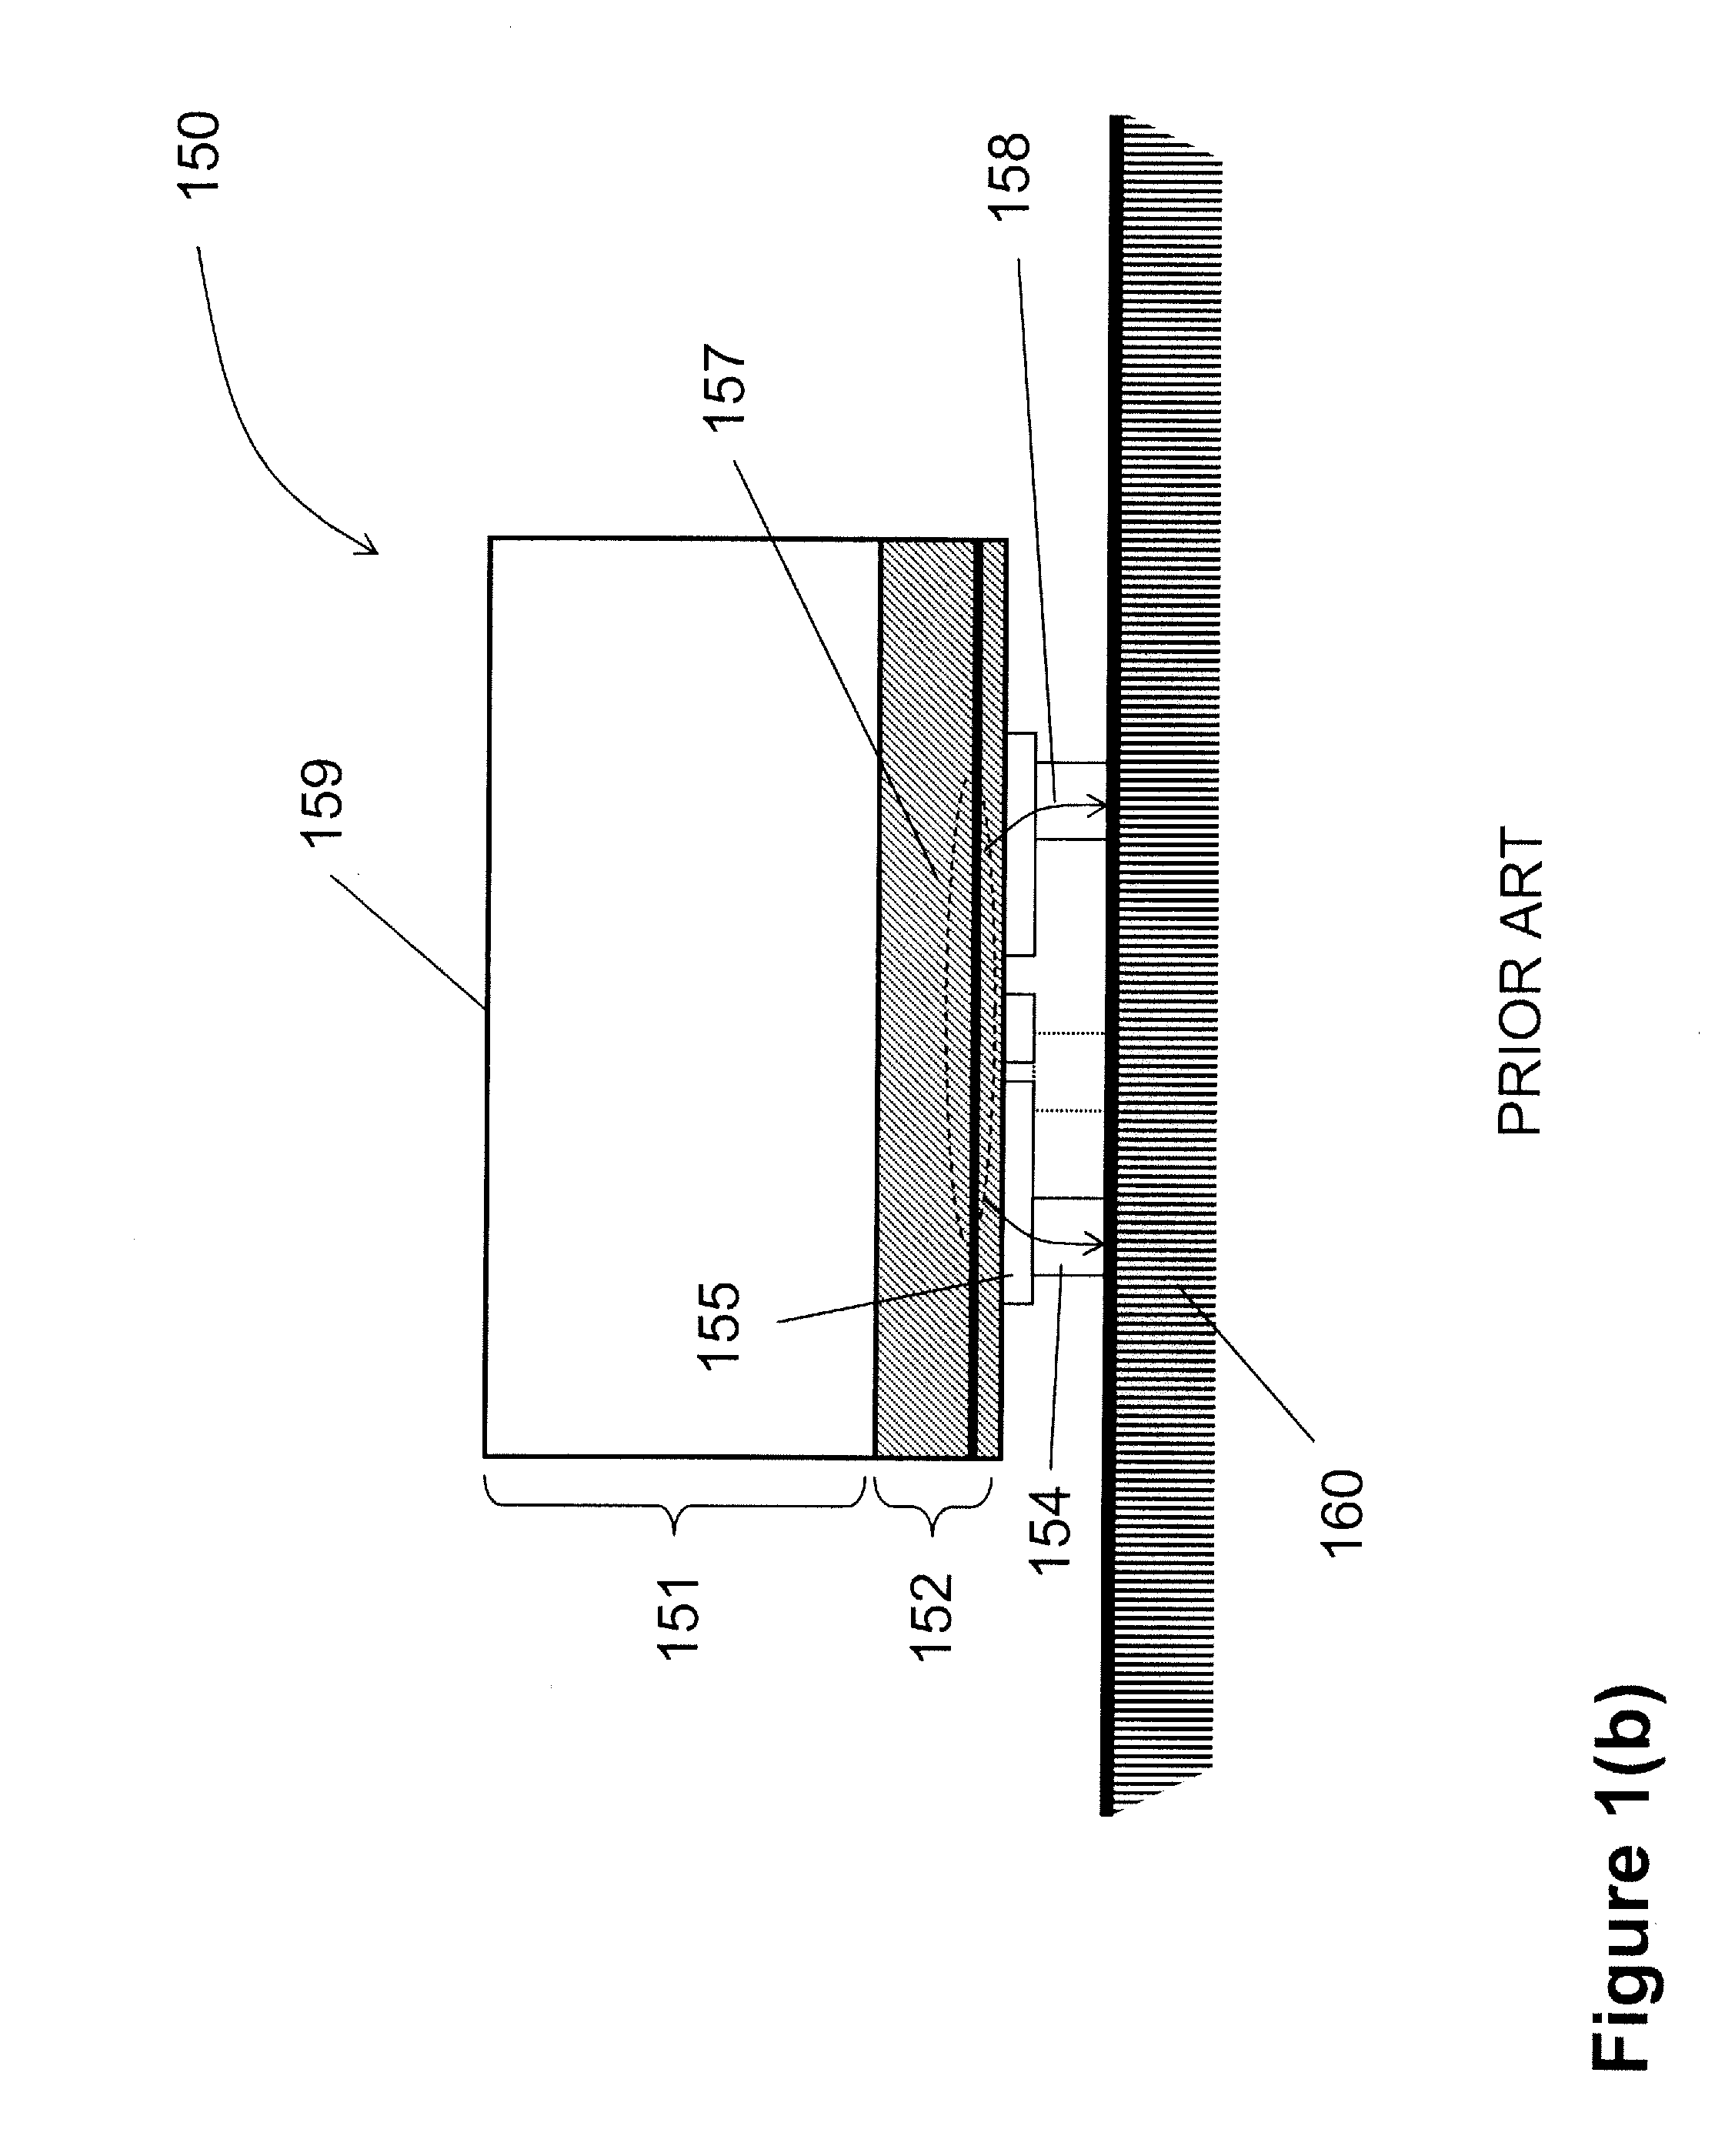 RF and milimeter-wave high-power semiconductor device